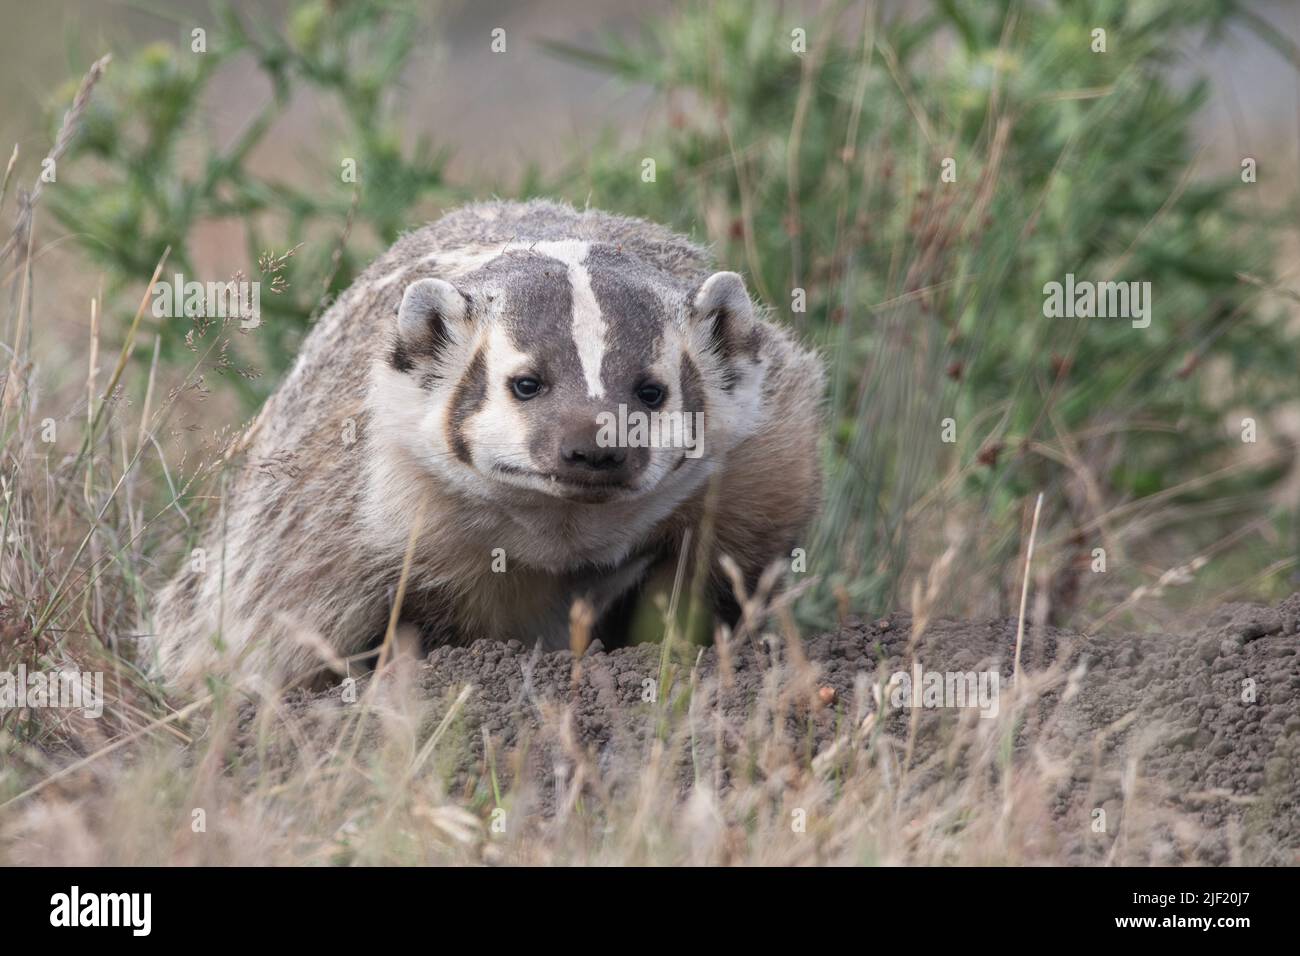 An American badger (Taxidea taxus) in Point Reyes National seashore in Marin county, California, USA. Stock Photo